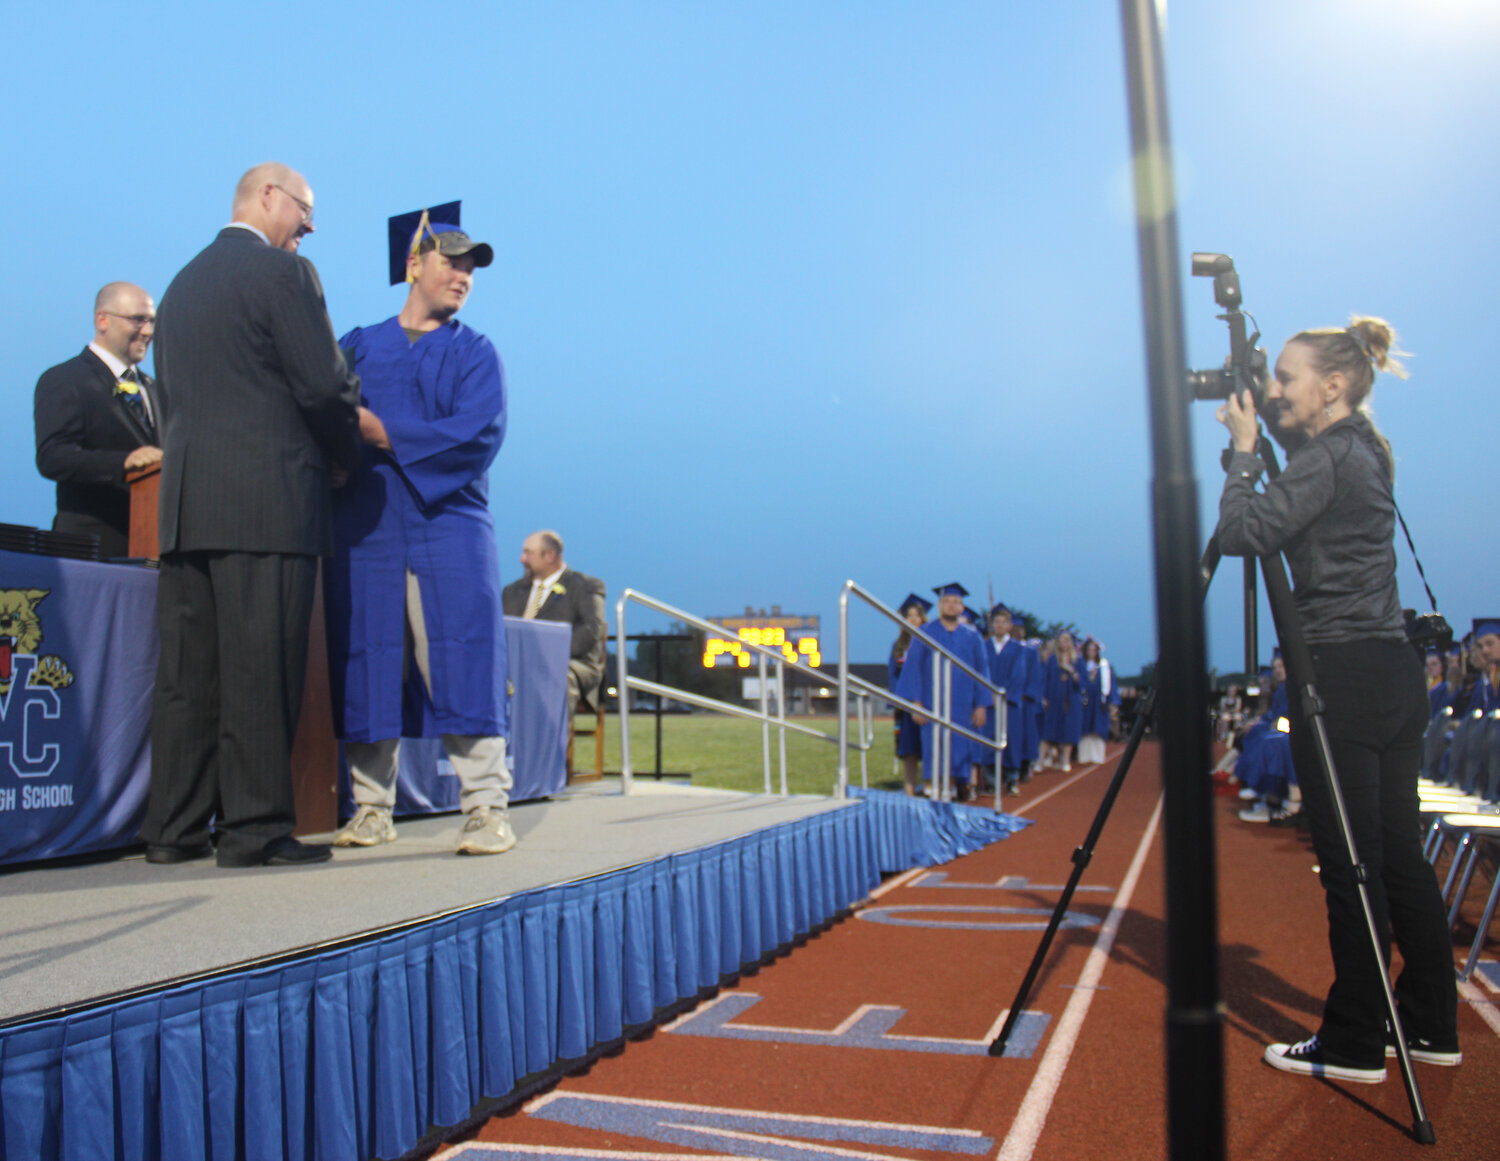 A Wright City High School senior poses with R-II School Board President Austin Jones while a photographer takes their picture during the graduation ceremony.